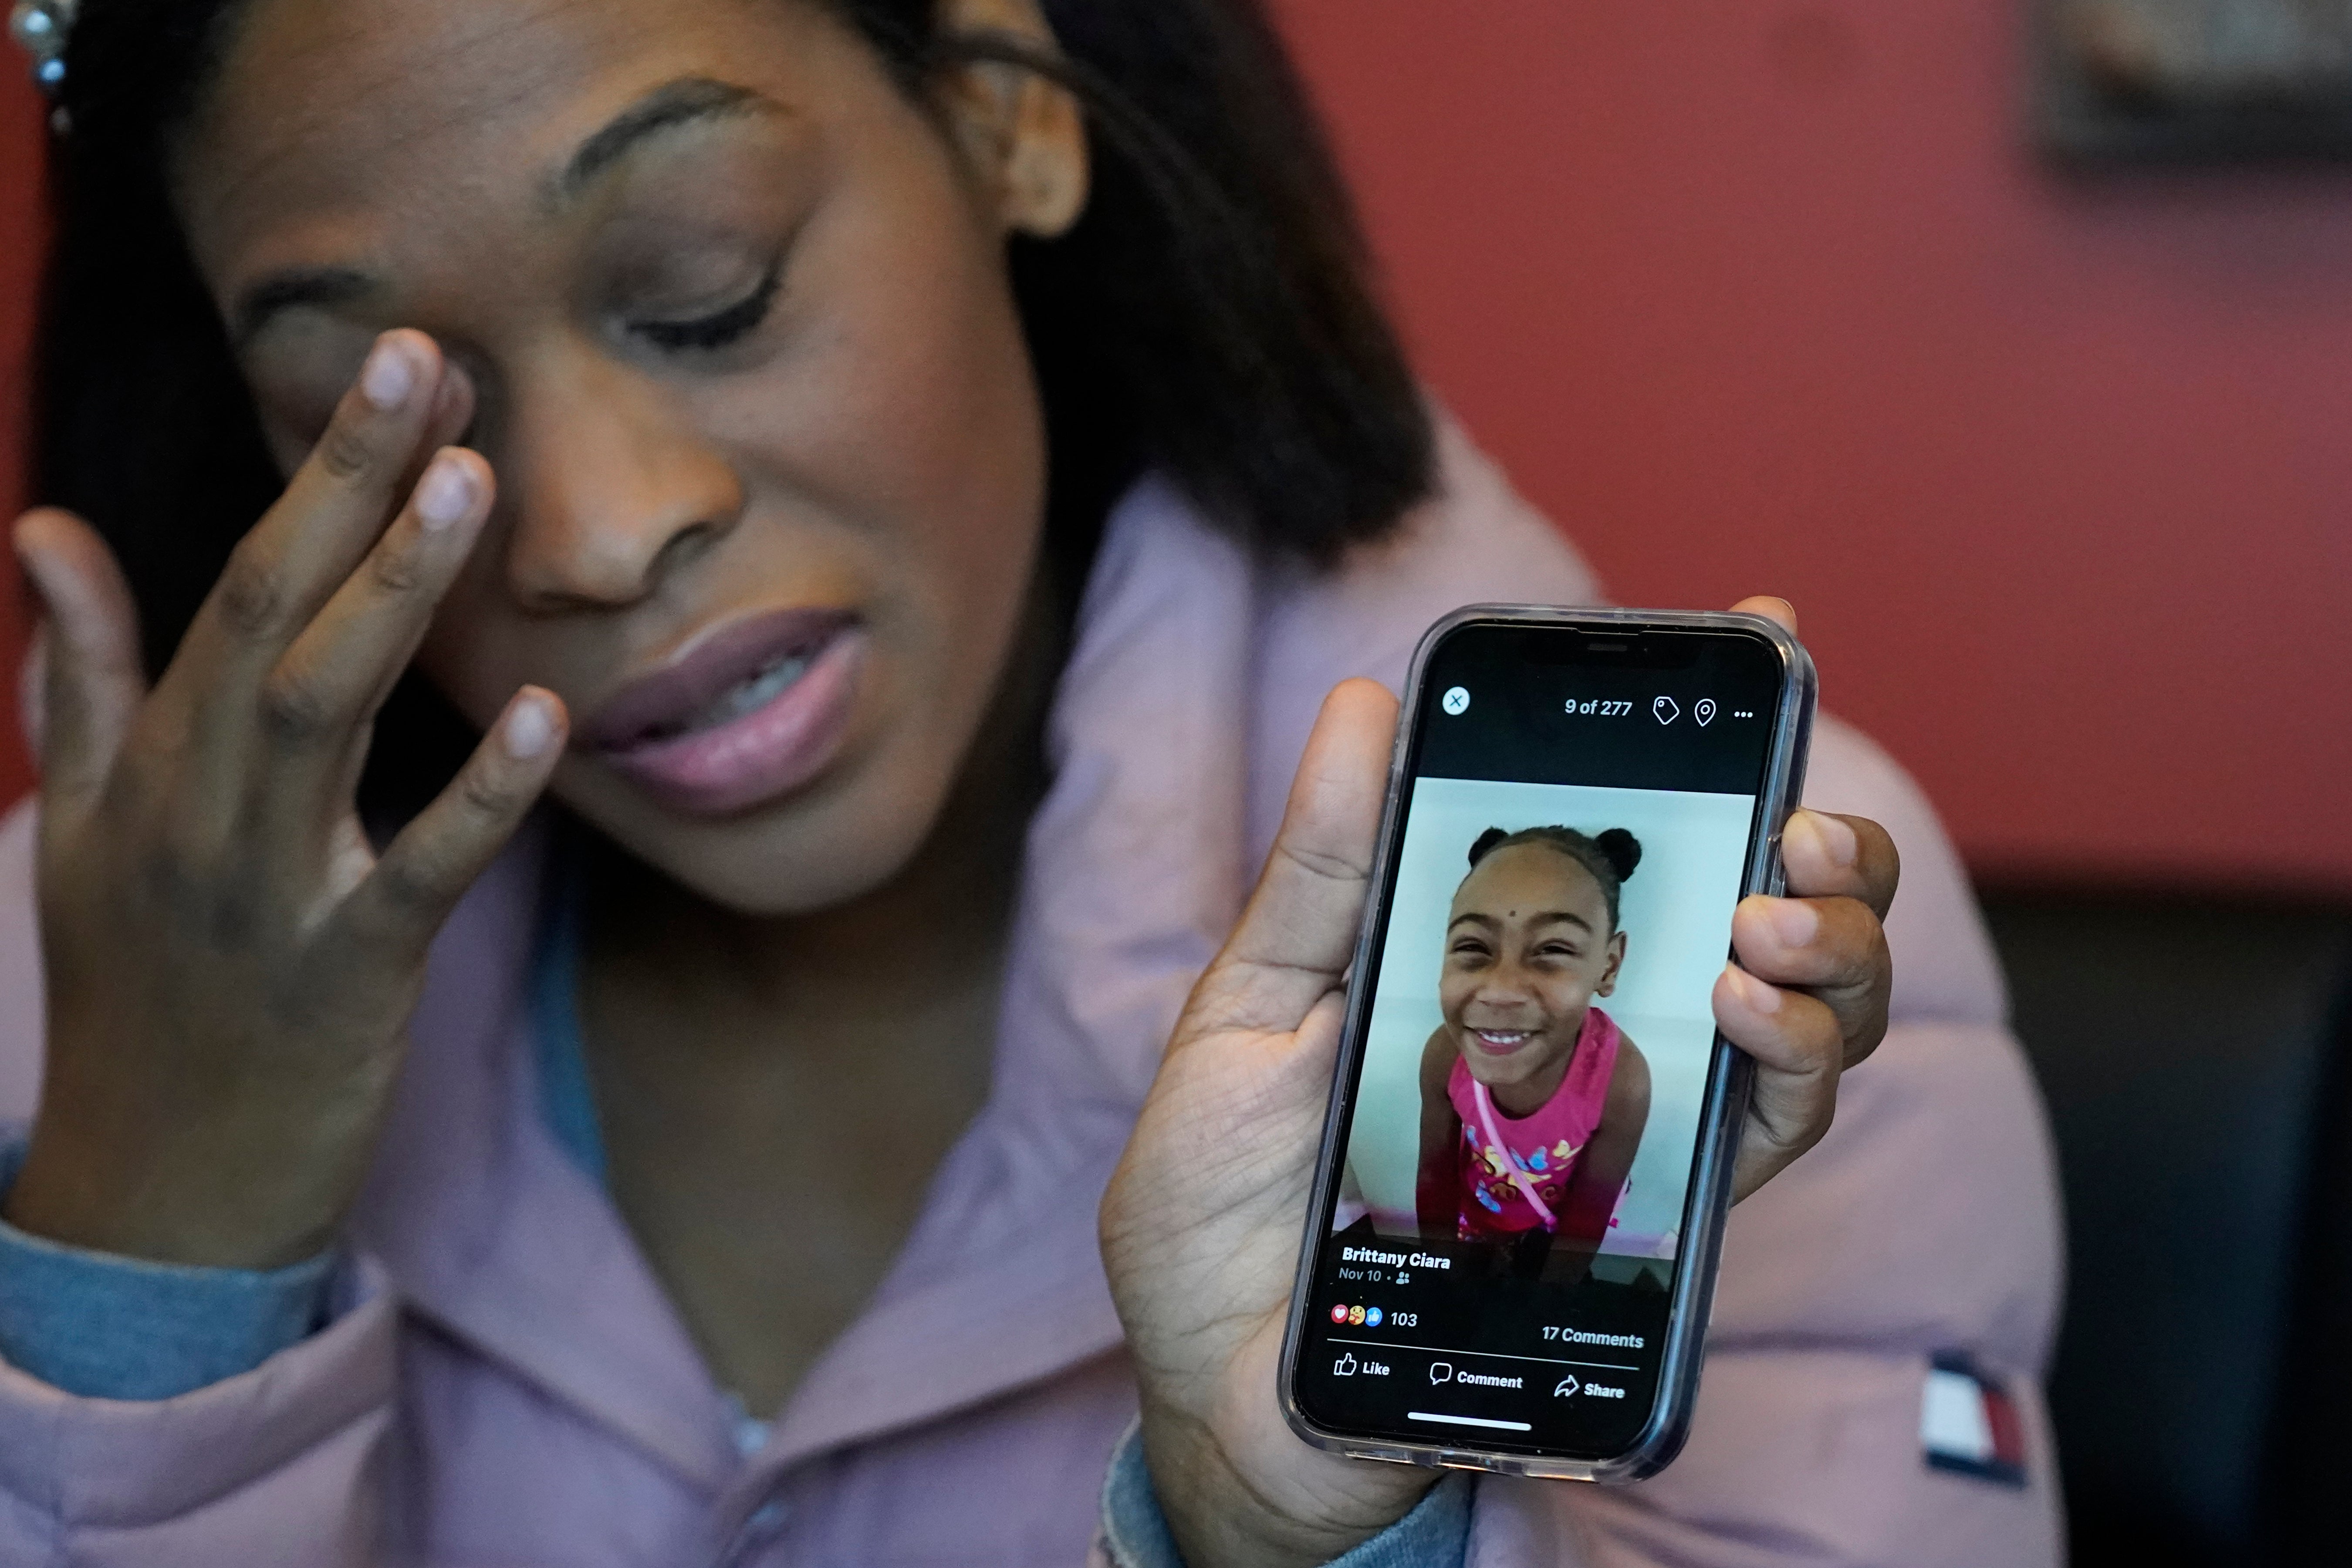 Brittany Tichenor-Cox, holds a photo of her daughter, Isabella "Izzy" Tichenor, during an interview Monday, Nov. 29, 2021, in Draper, Utah. Tichenor-Cox said her 10-year-old daughter died by suicide after she was harassed for being Black and autistic at school. She is speaking out about the school not doing enough to stop the bullying. (AP Photo/Rick Bowmer)